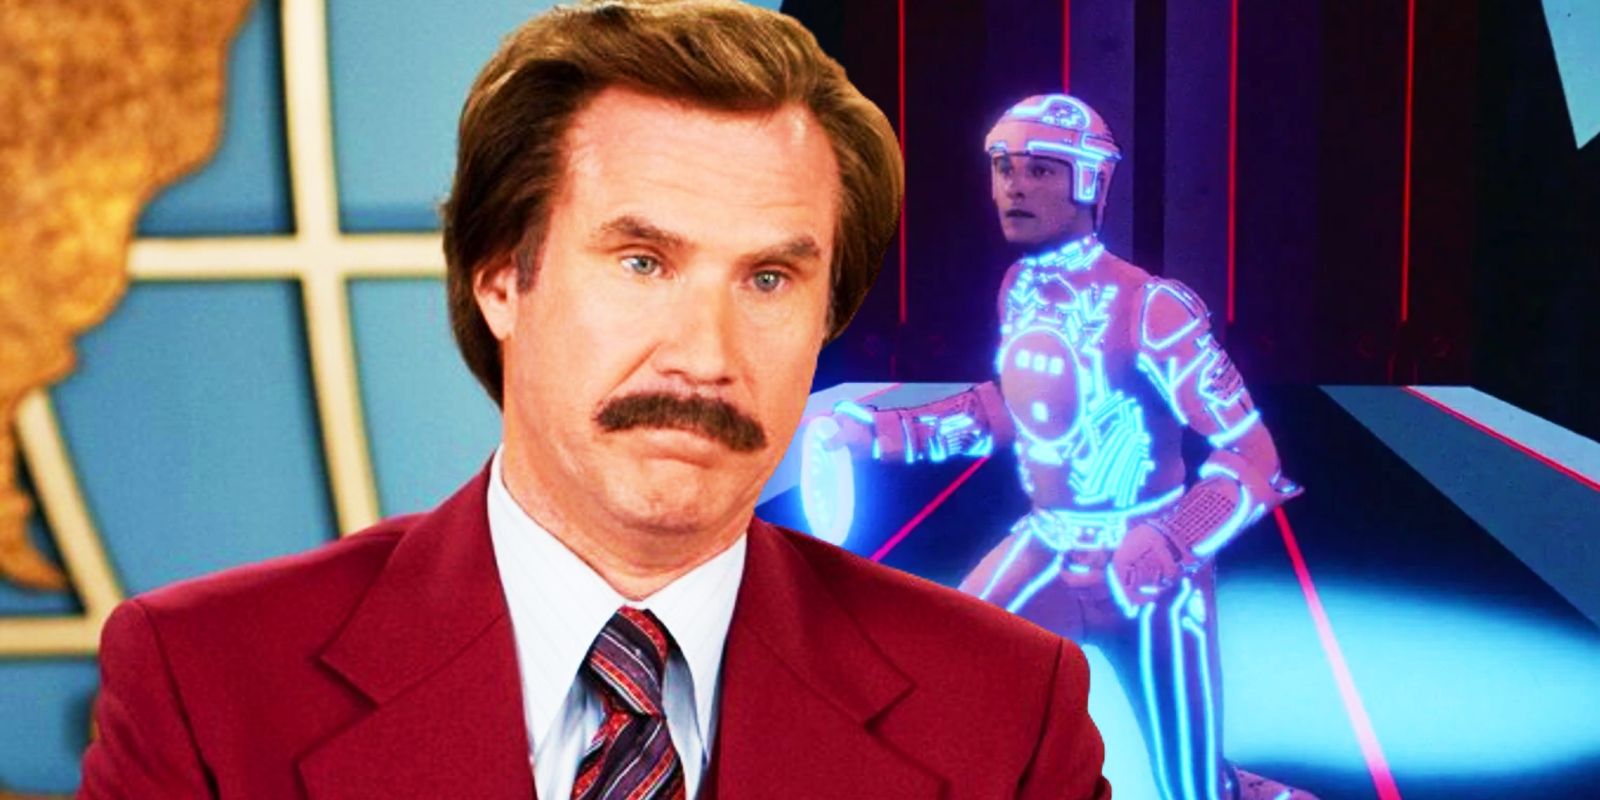 Will Ferrell as Ron Burgundy in Anchorman juxtaposed with characters in light suits in Tron